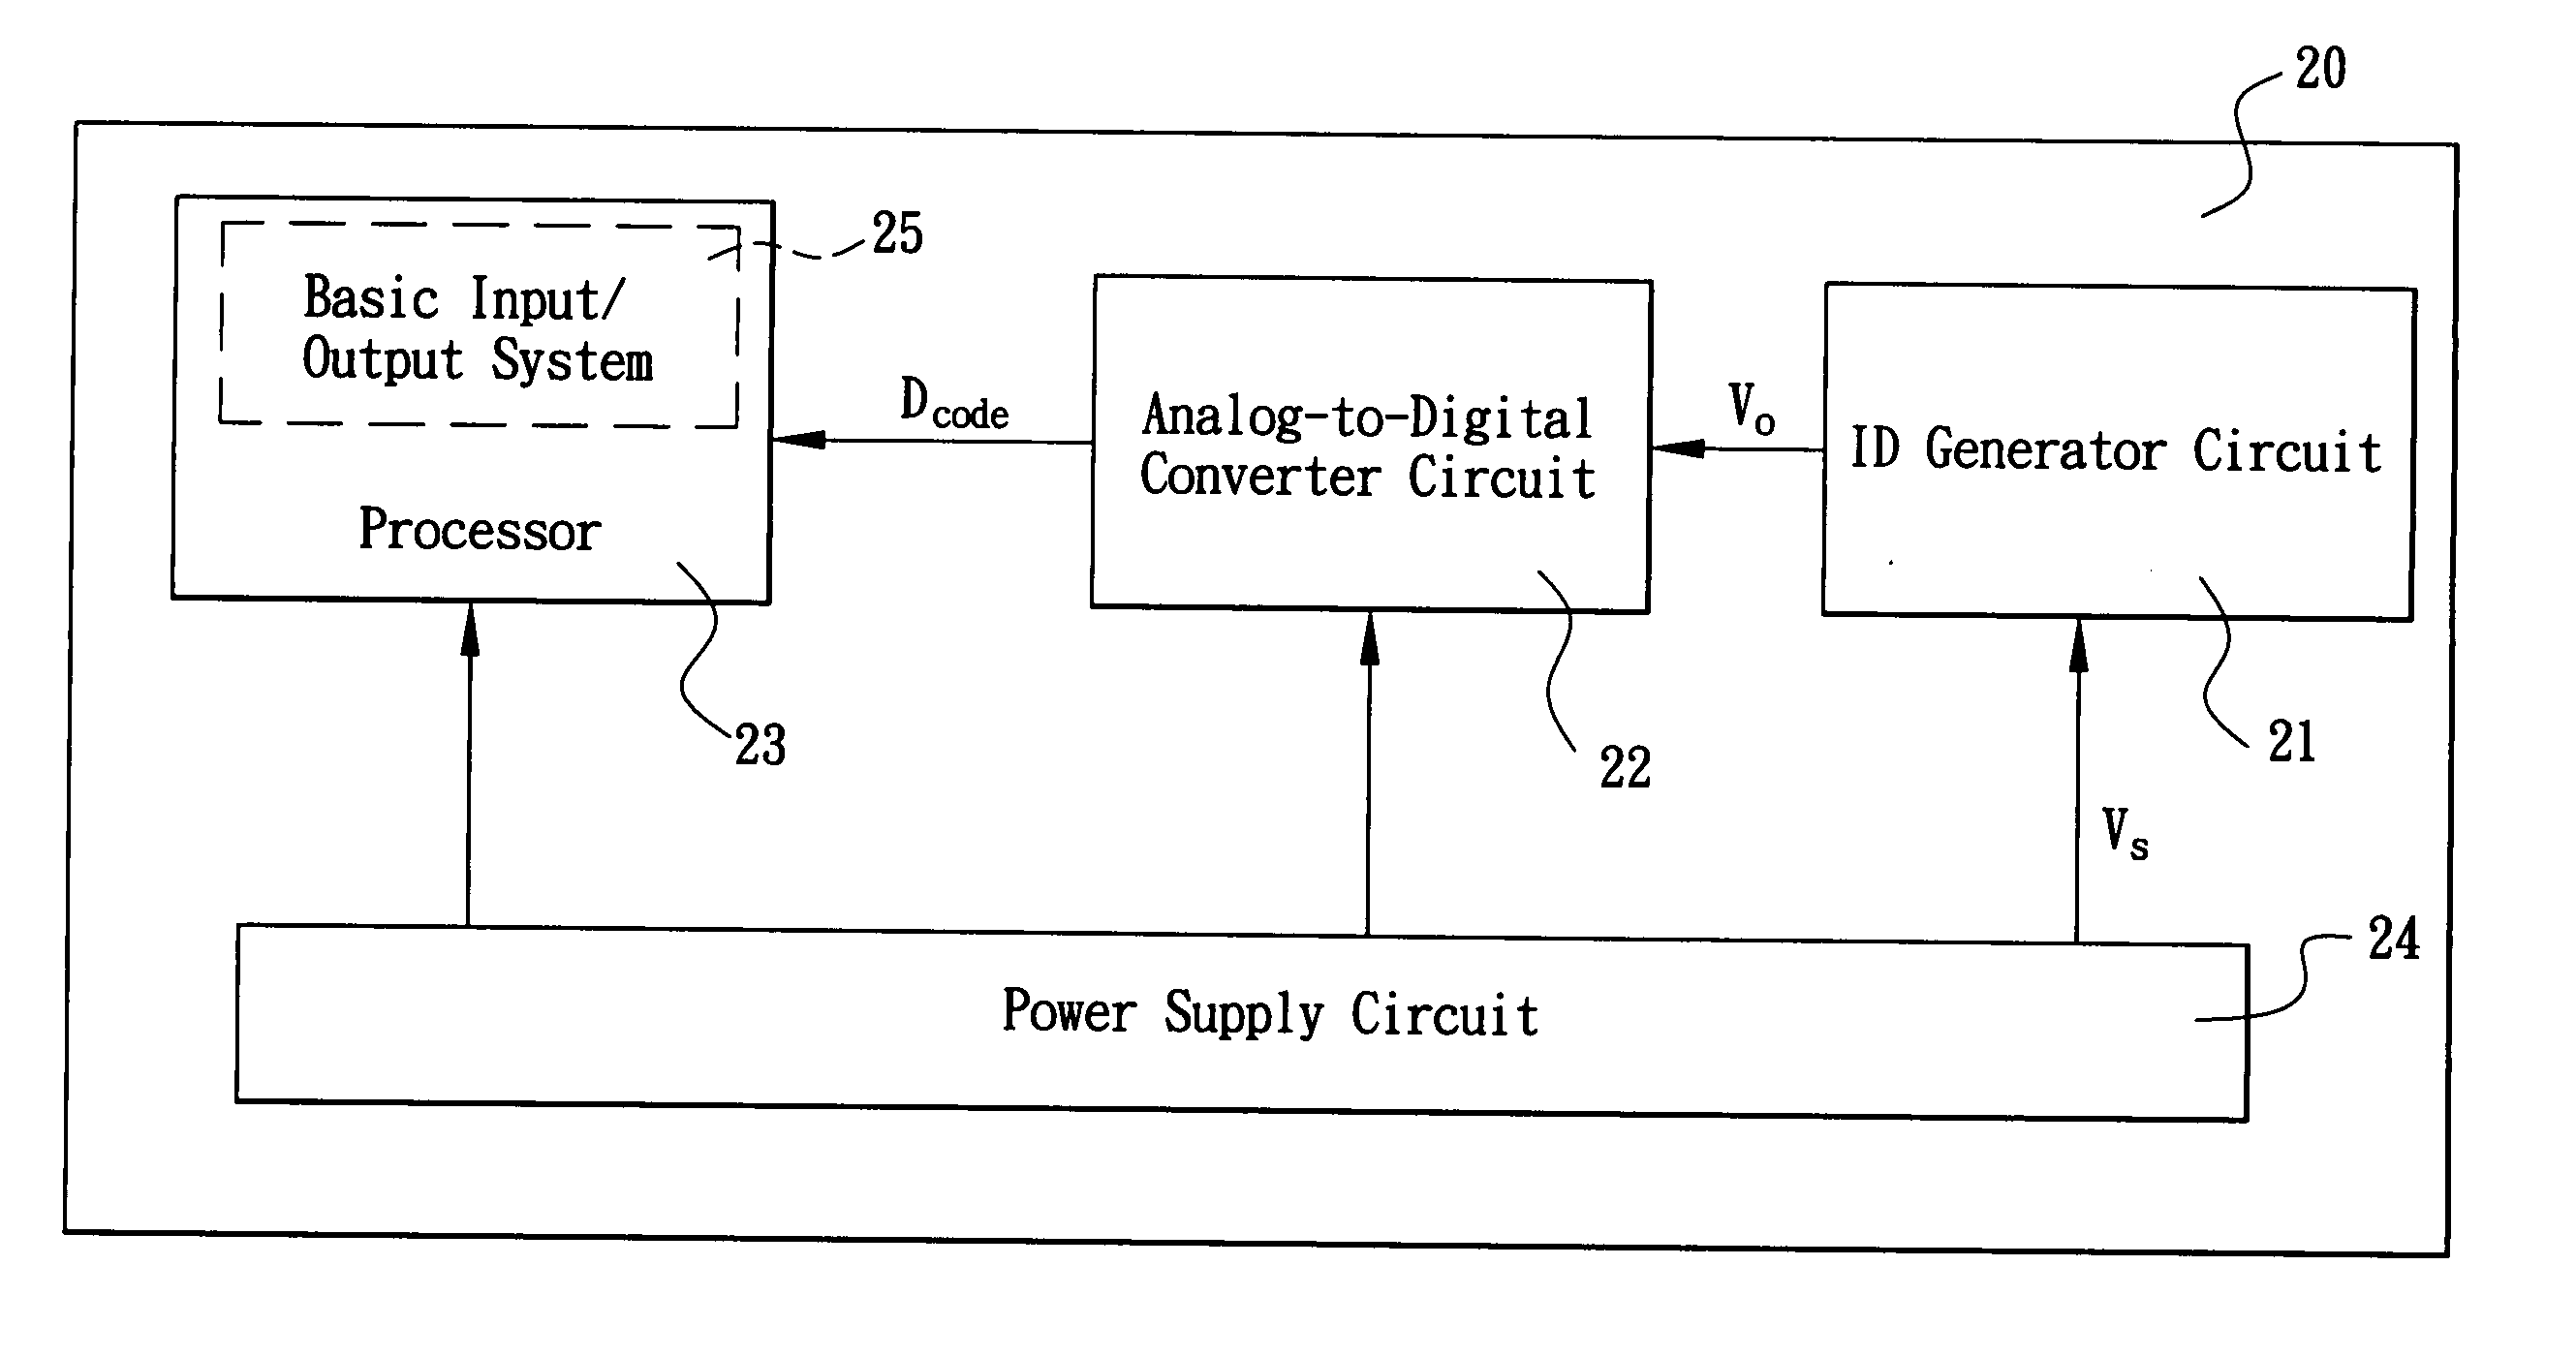 Electronic circuit structure using an analog-to-digital conversion concept for saving circuit pins